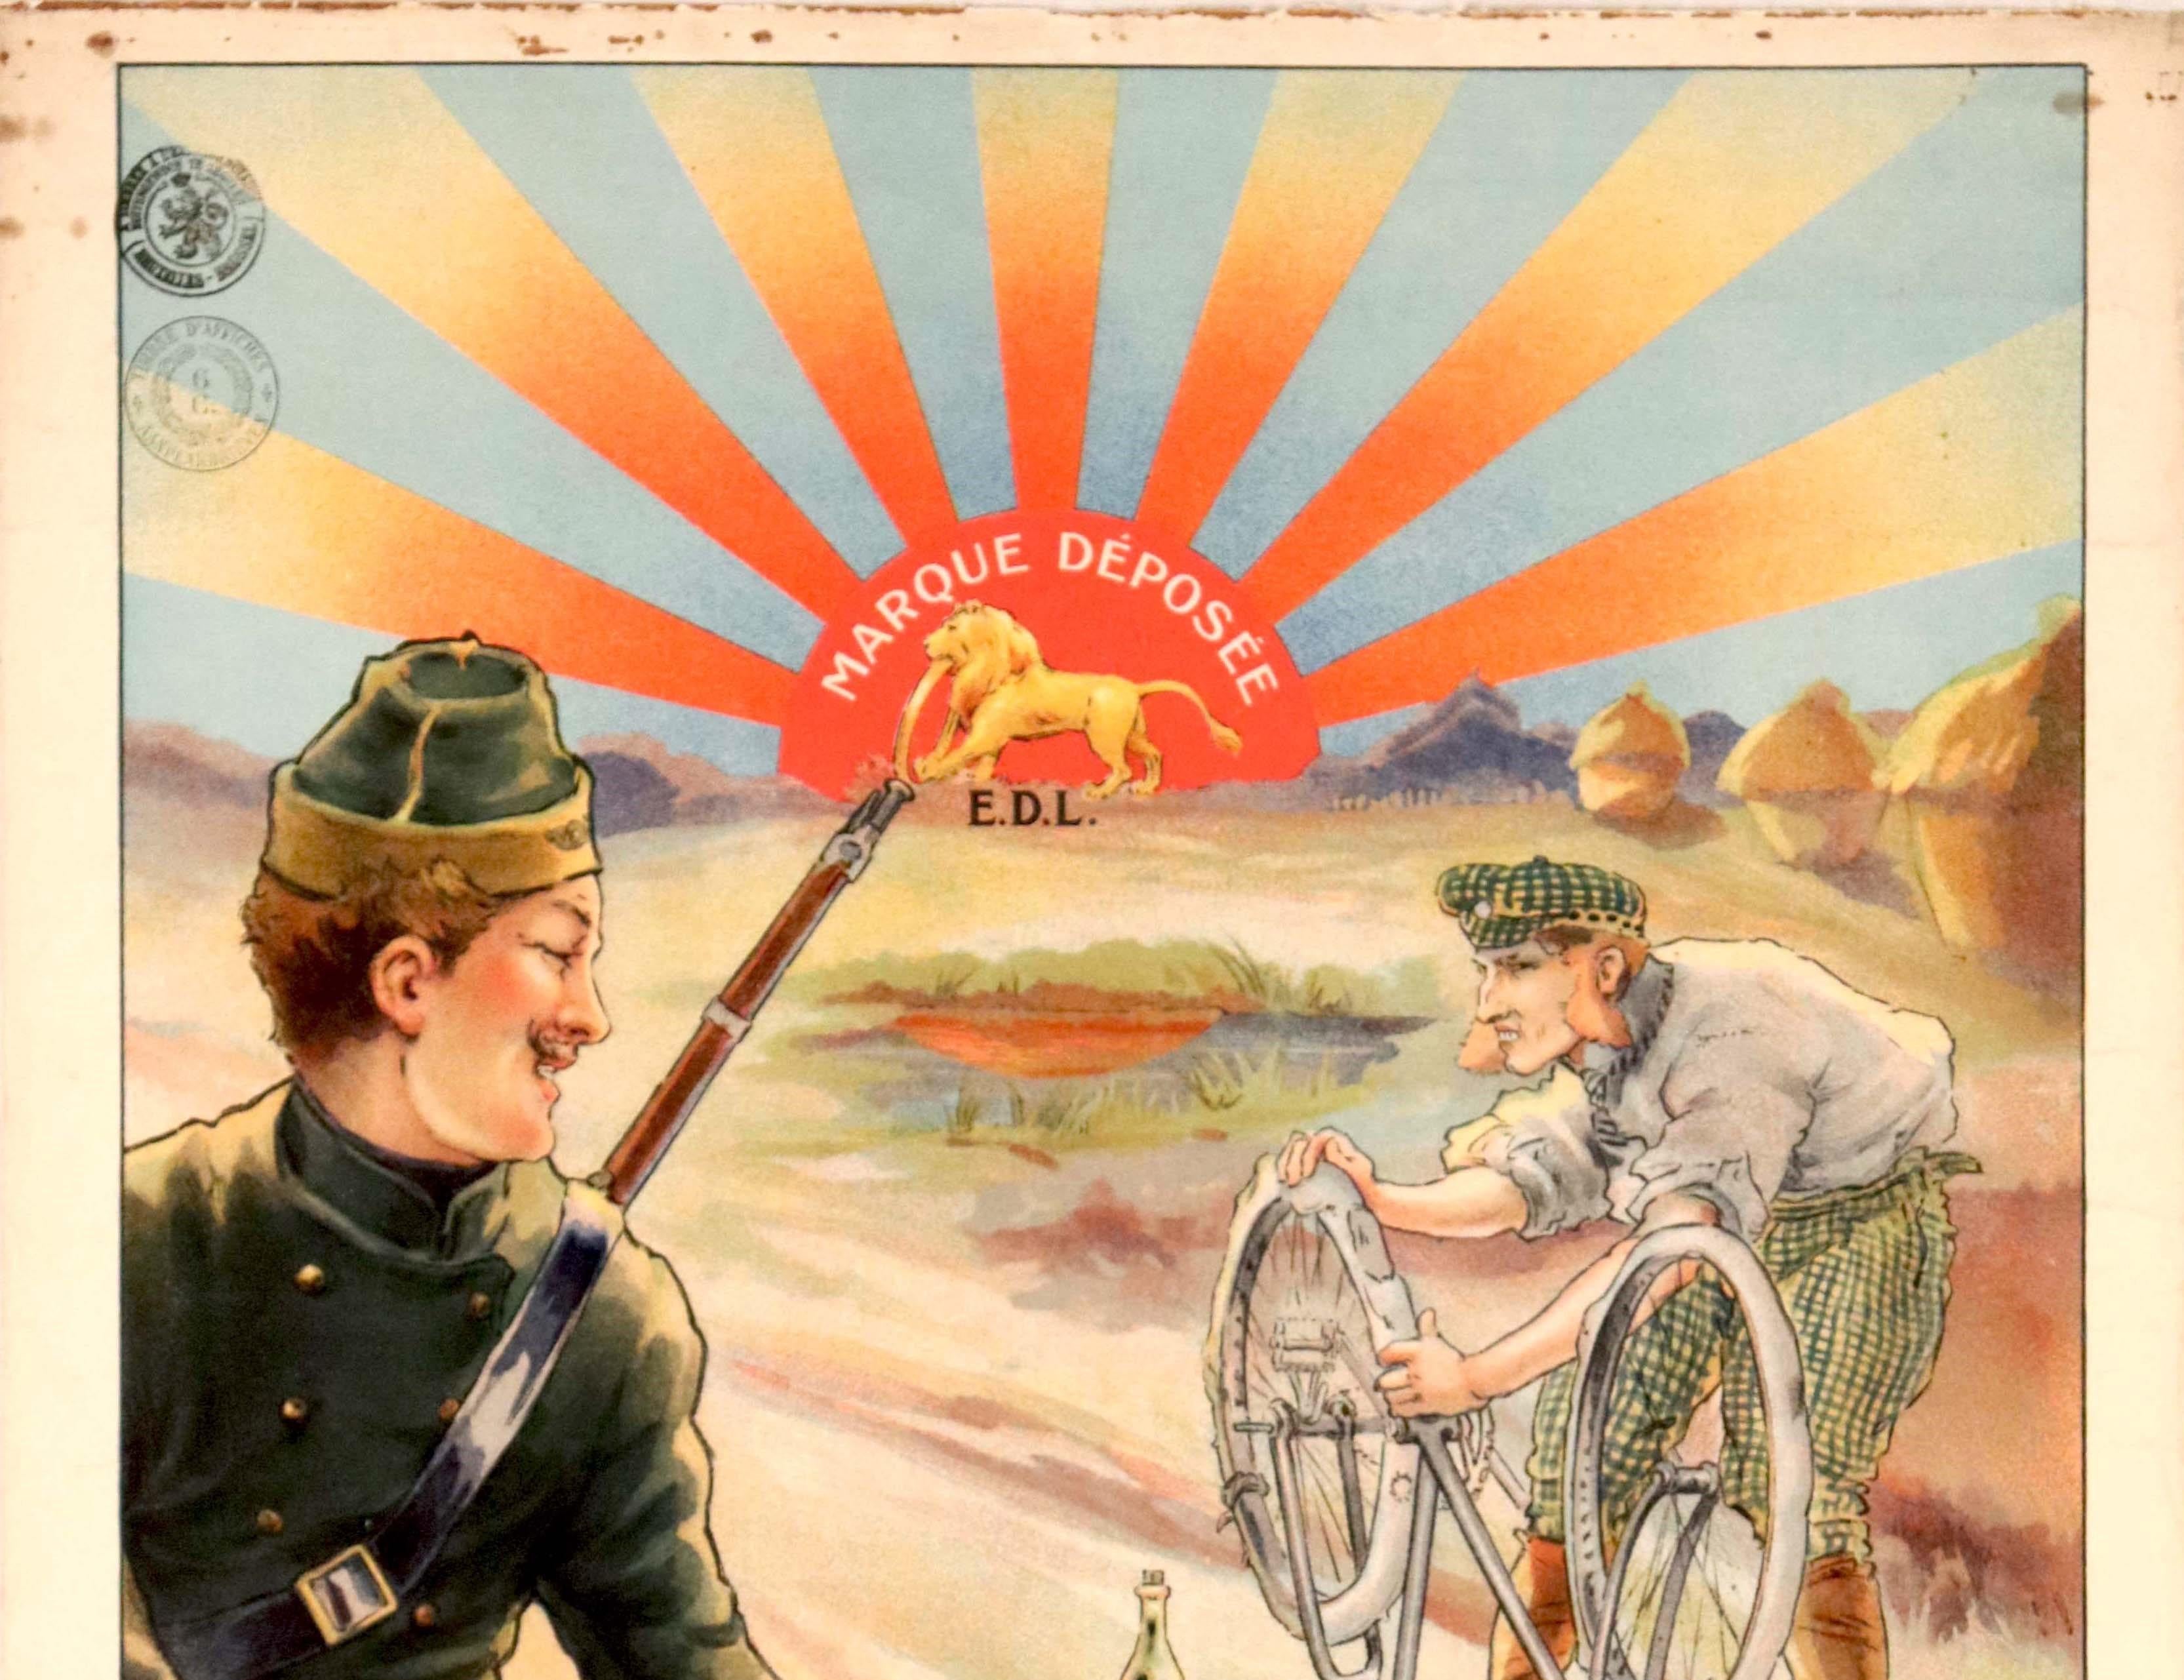 Original antique advertising poster for Le Lion tyres featuring an illustration of a smiling Belgian carabinier soldier with a rifle gun over his shoulder riding a bicycle past a man mending a flat tyre on his bike on the side of a countryside path,